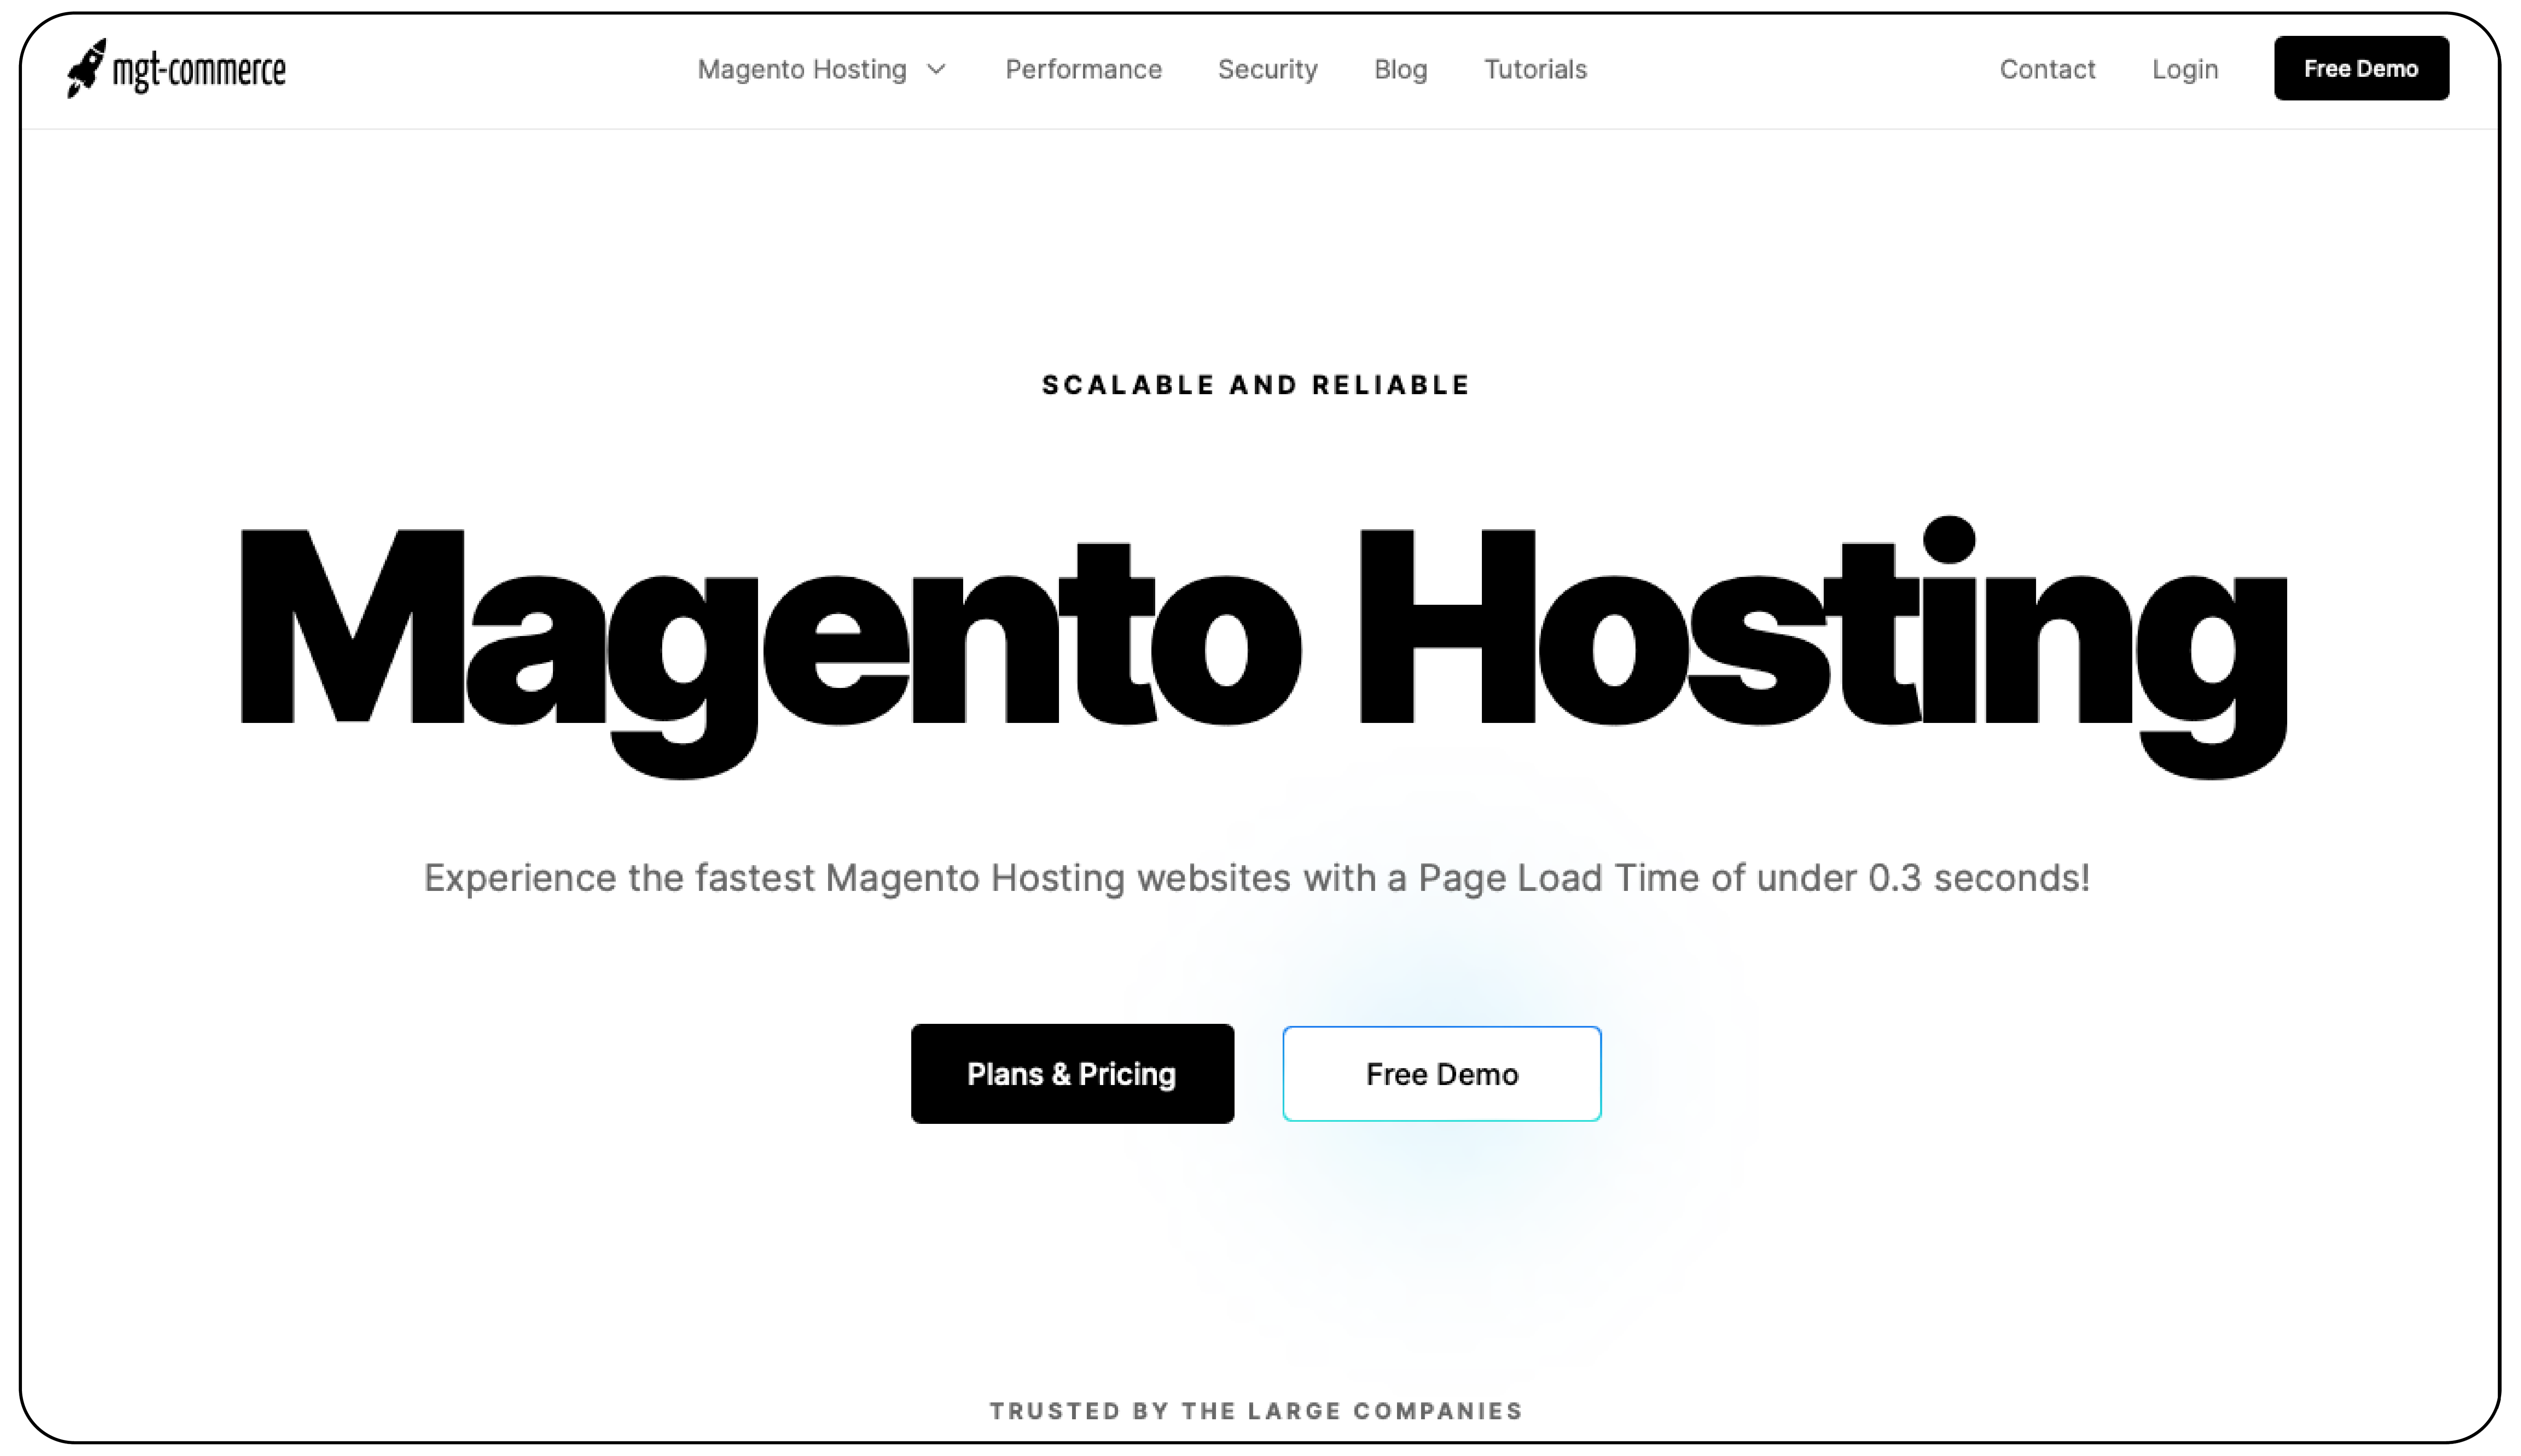 MGT Commerce homepage showcasing features for Magento hosting